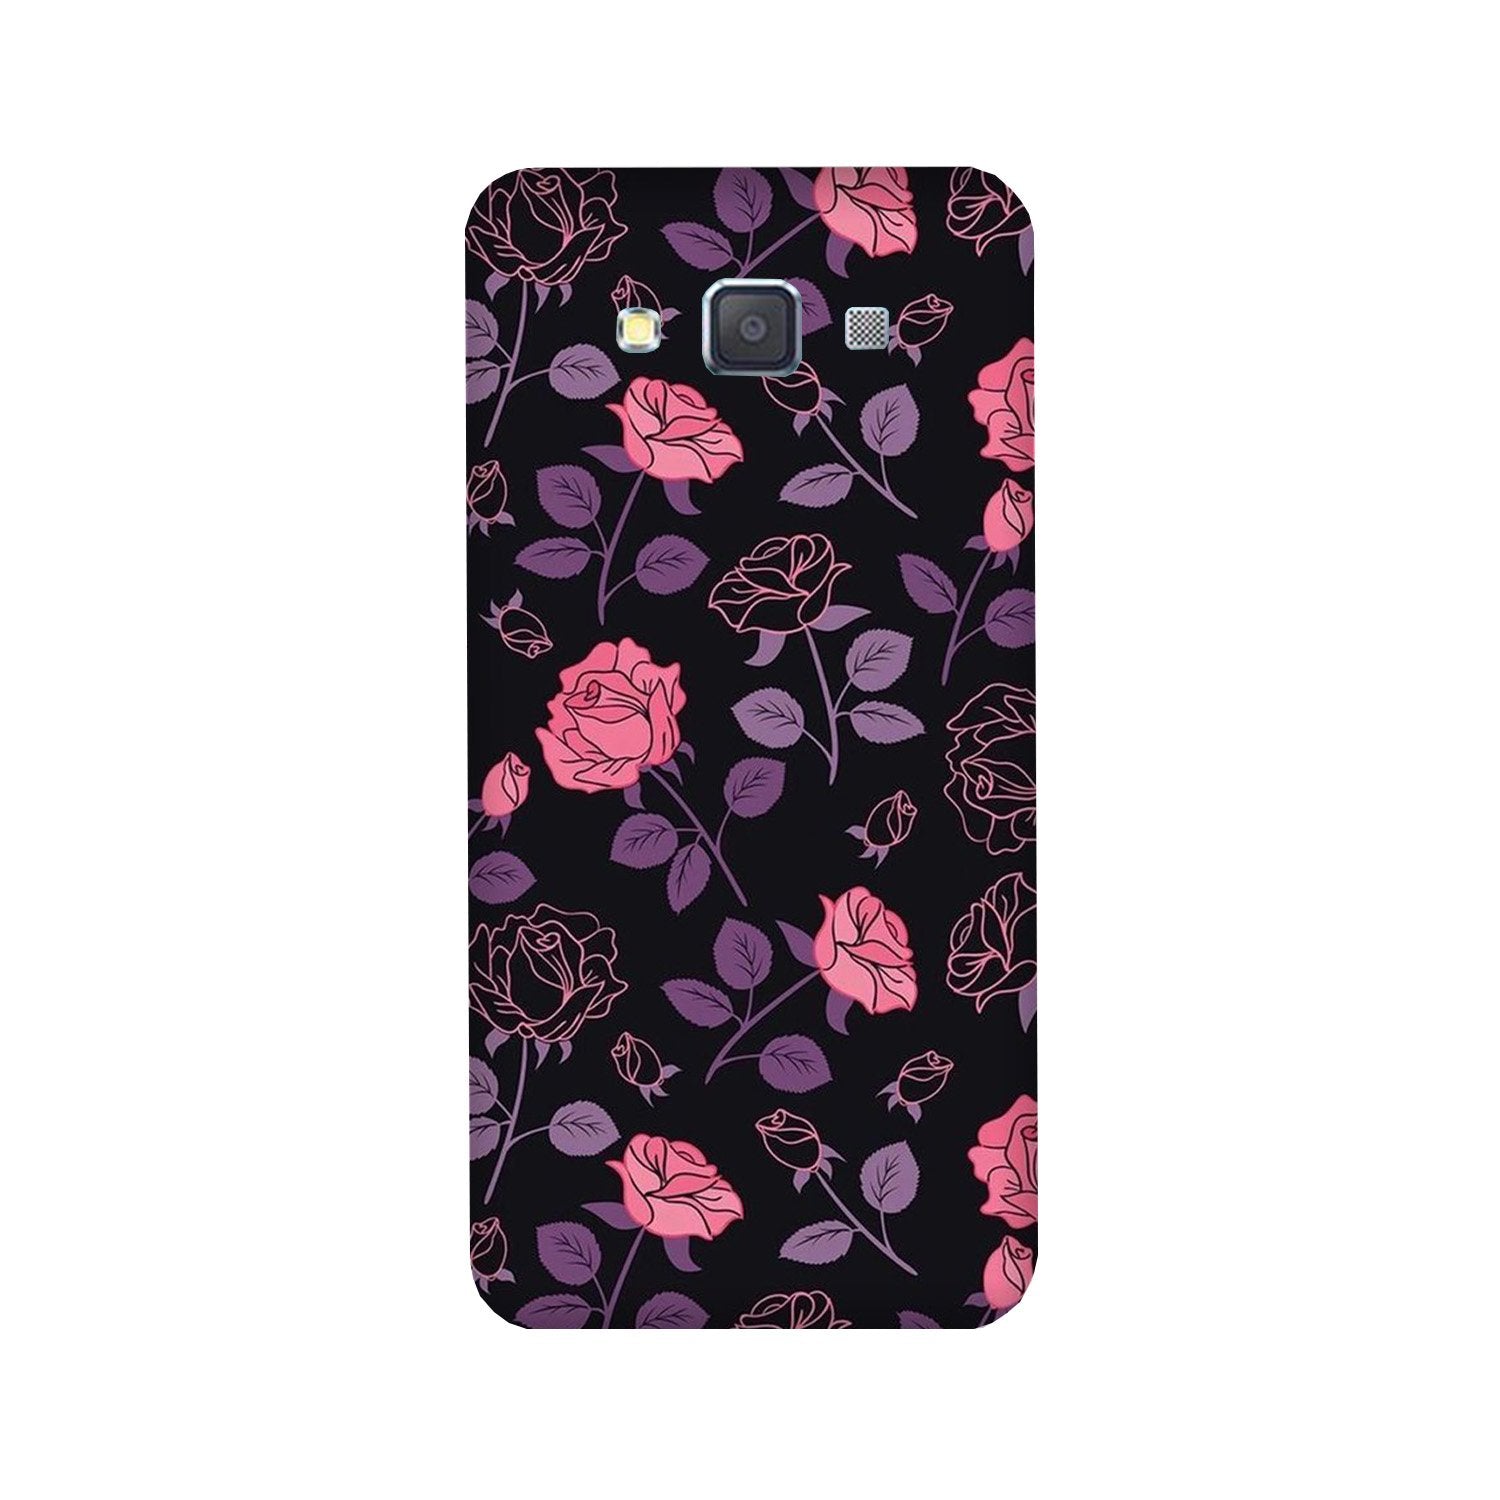 Rose Black Background Case for Galaxy Grand 2